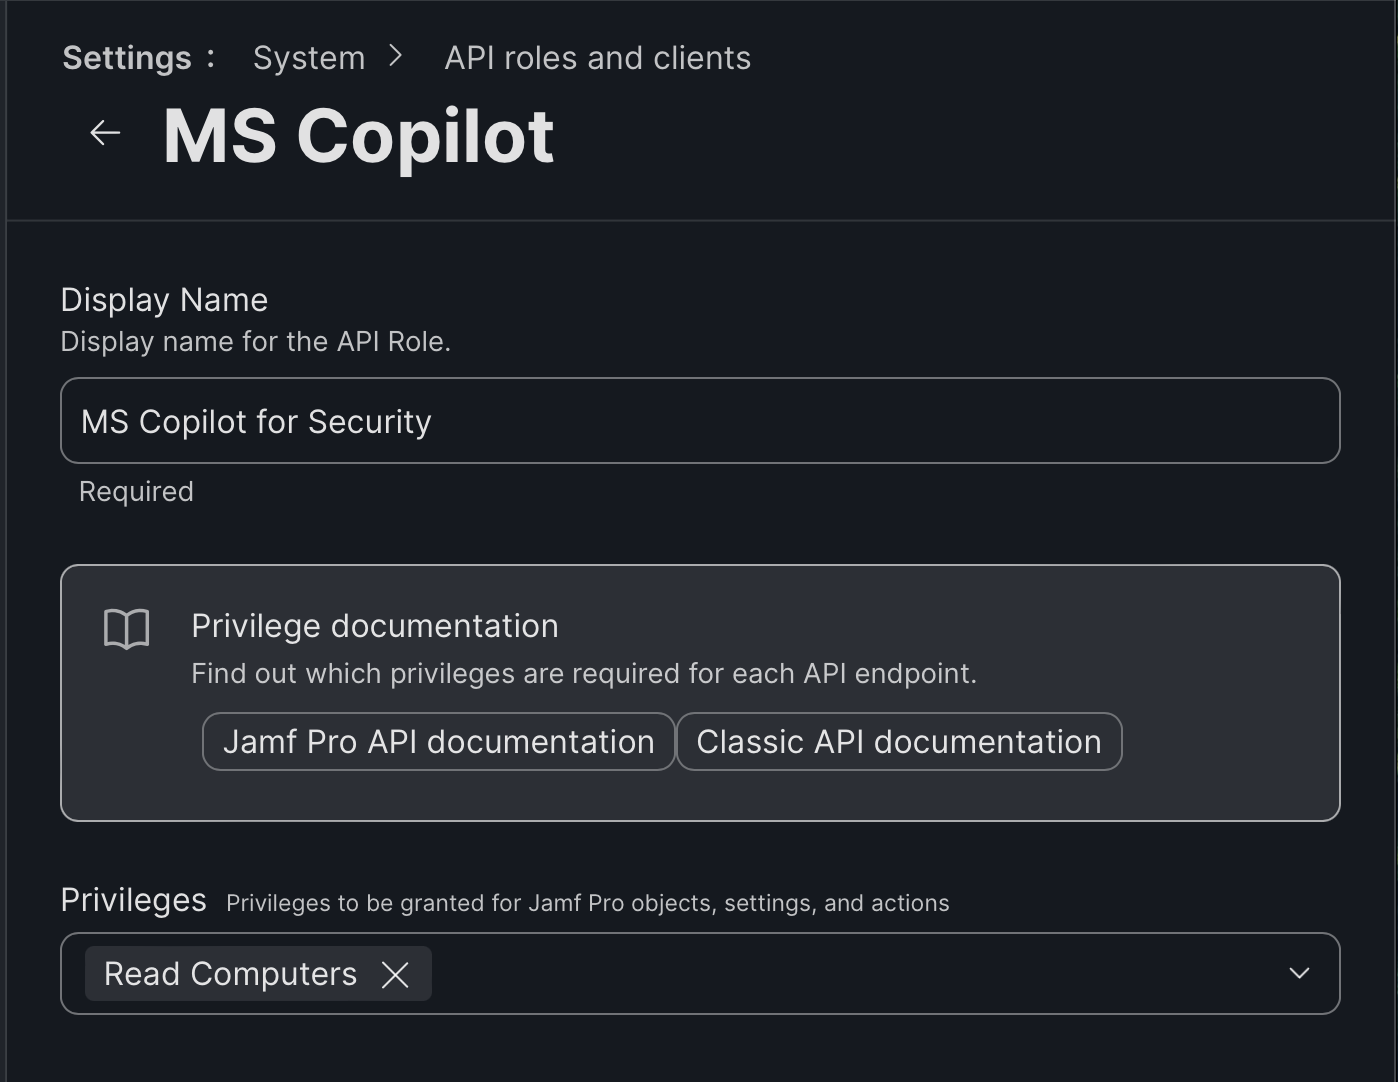 Screenshot showing how to assign an API role to a client with Read Computers permissions.